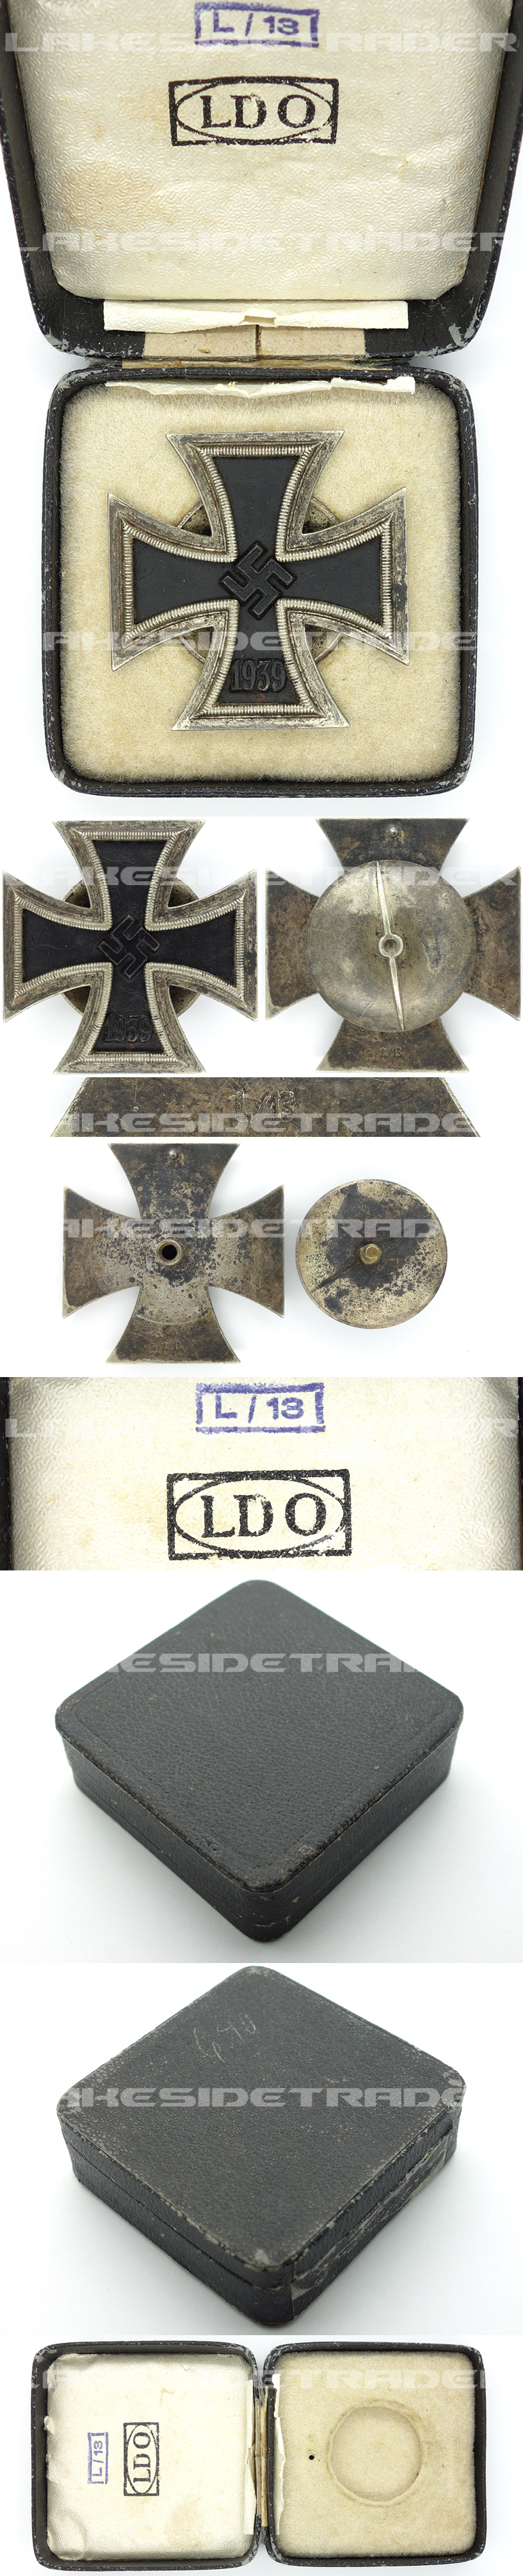 Cased 1st Class Iron Cross by L/13